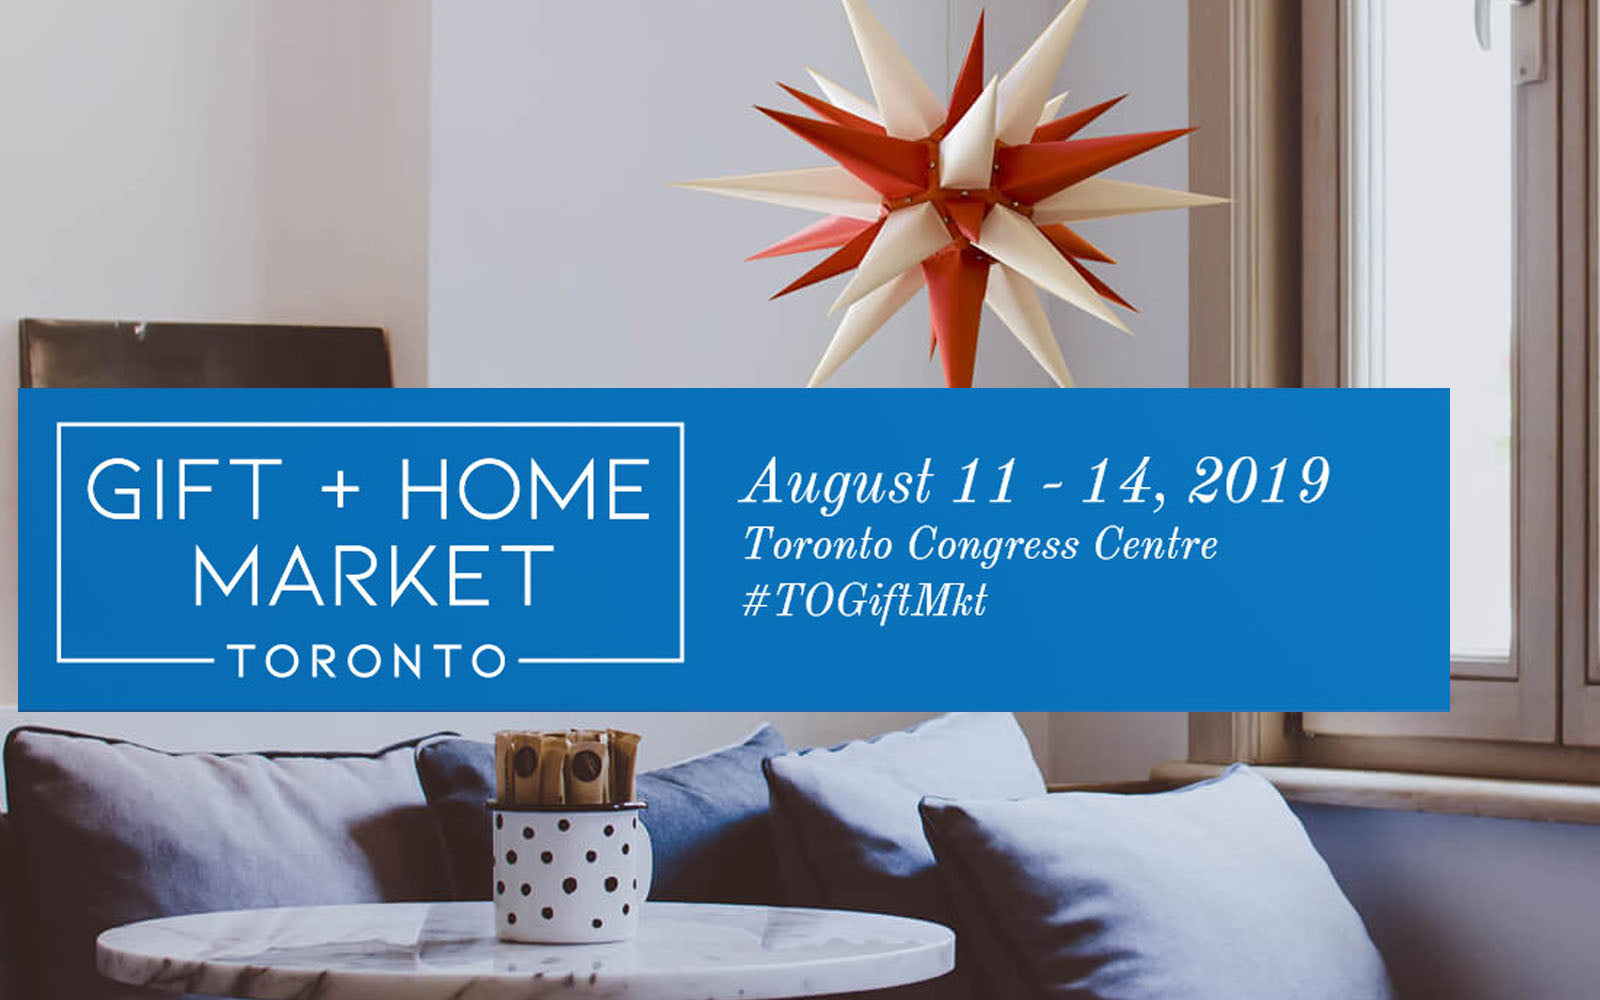 WELCOME TO THE NEW TORONTO GIFT+HOME MARKET